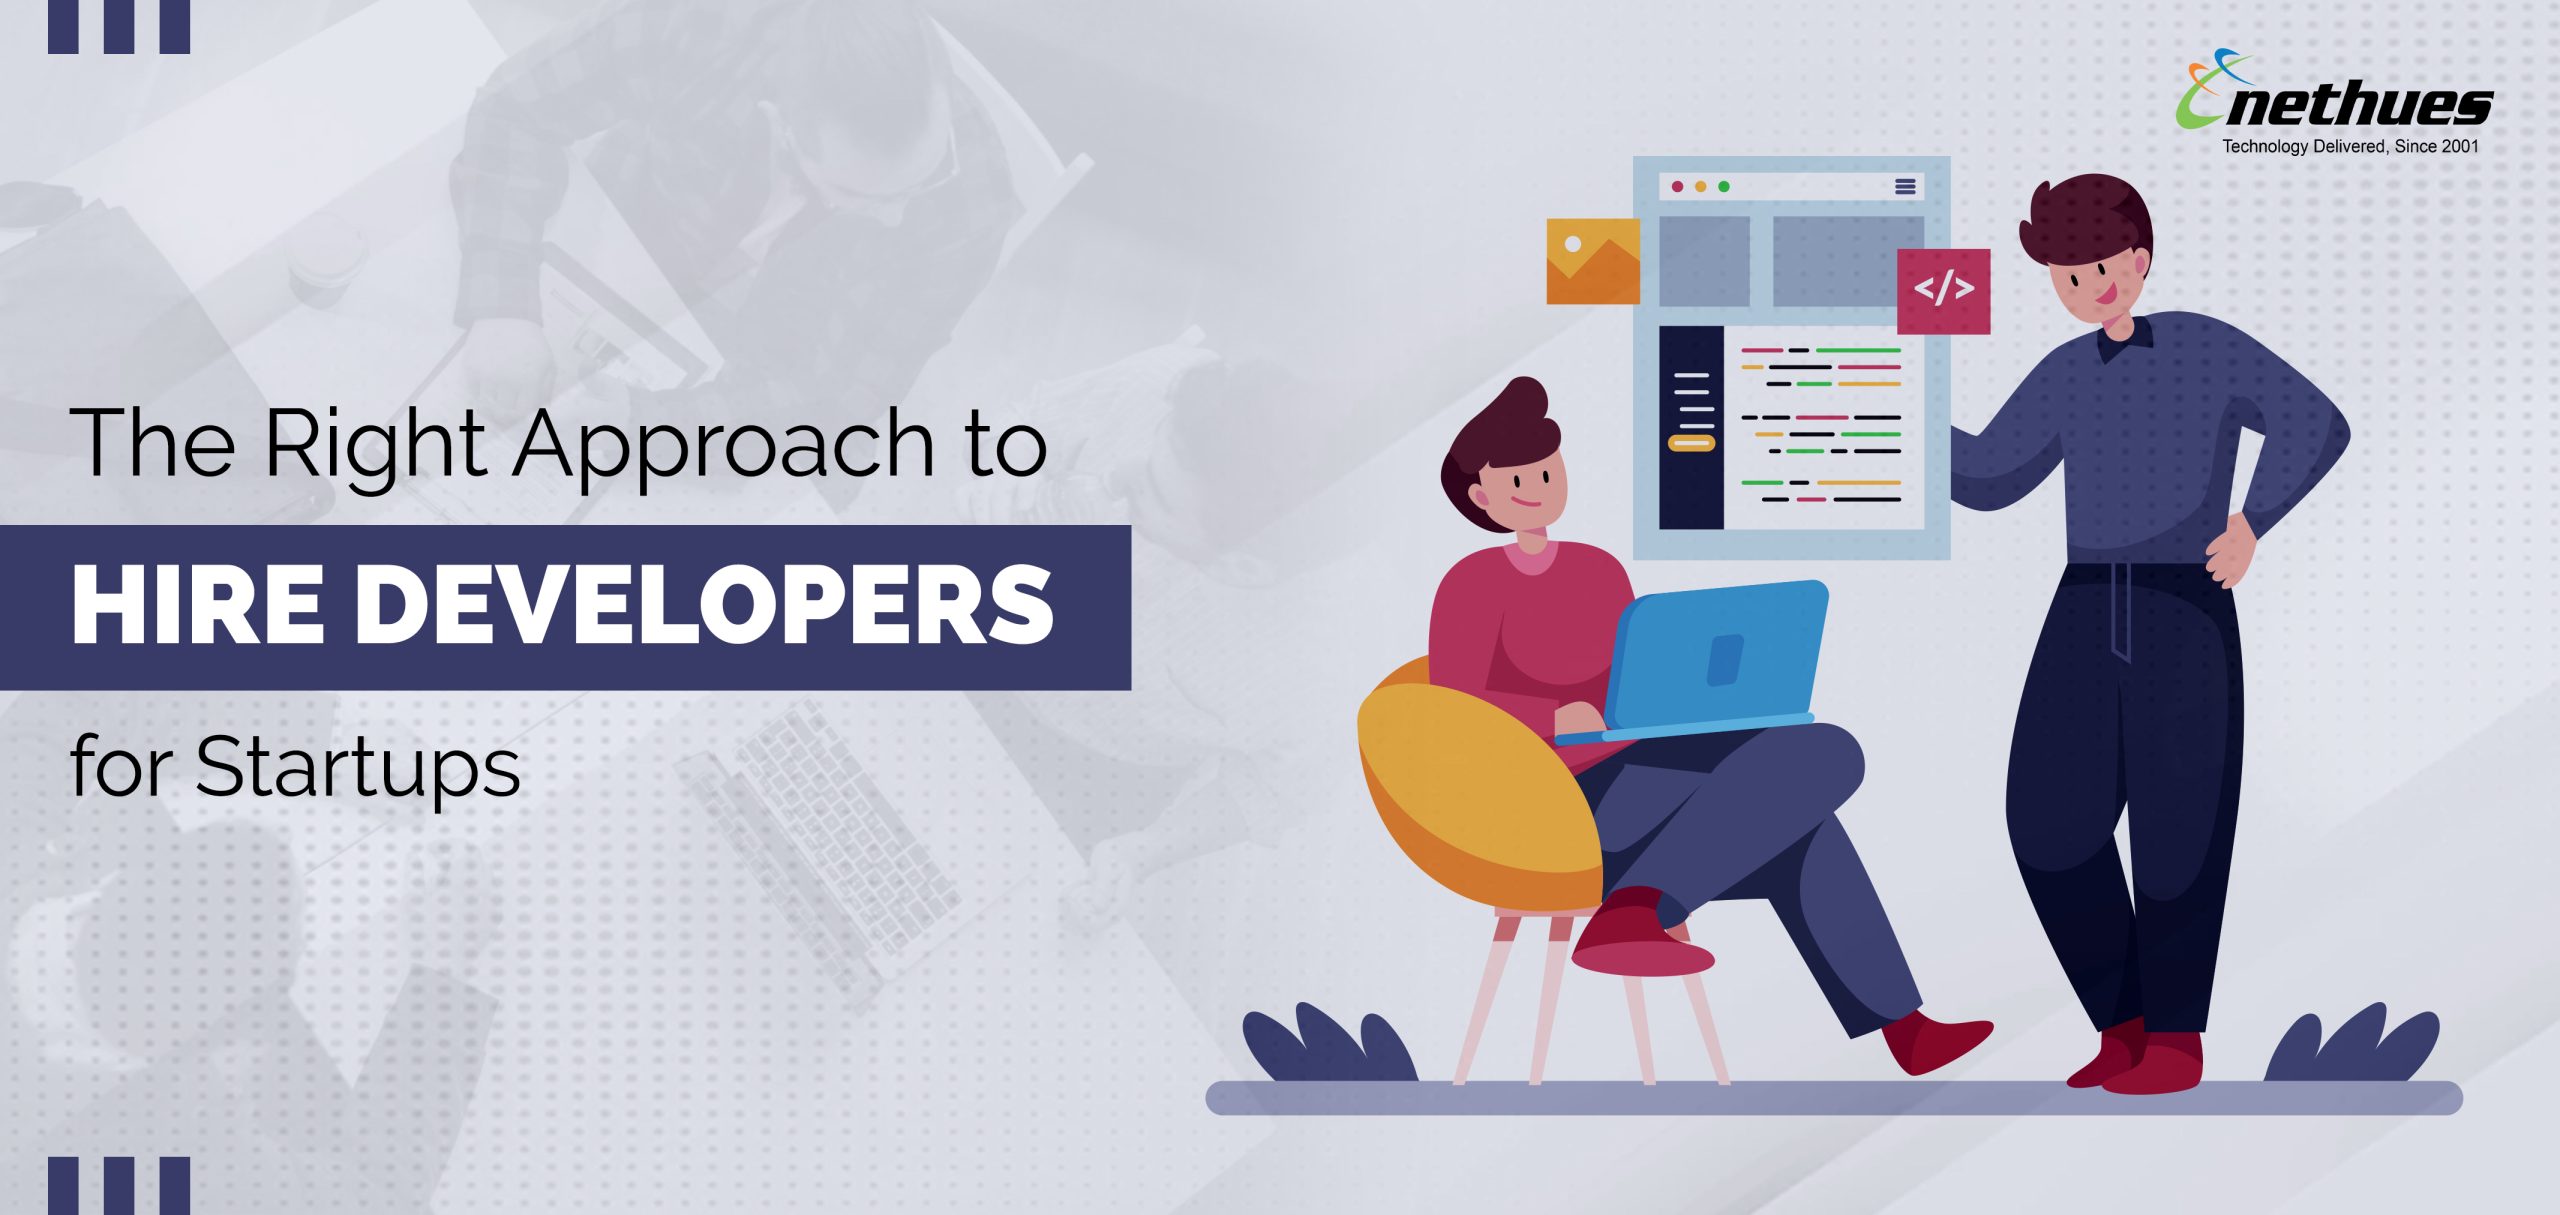 The Right Approach to Hire Developers for Startups